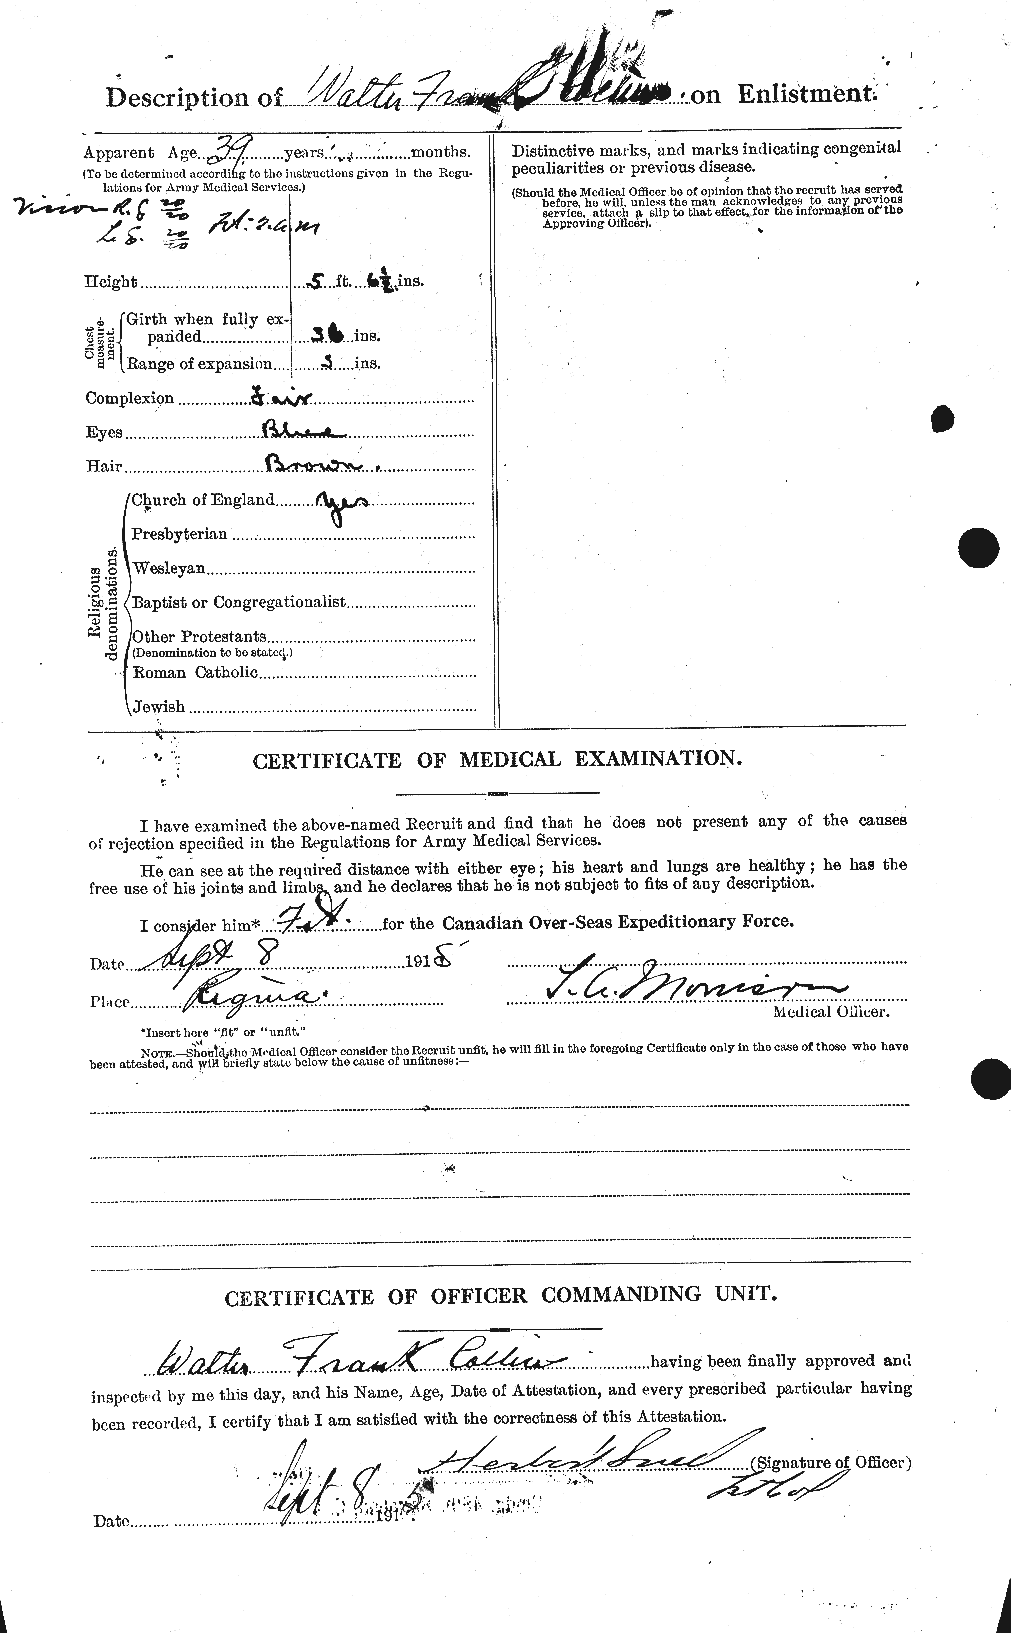 Personnel Records of the First World War - CEF 068832b